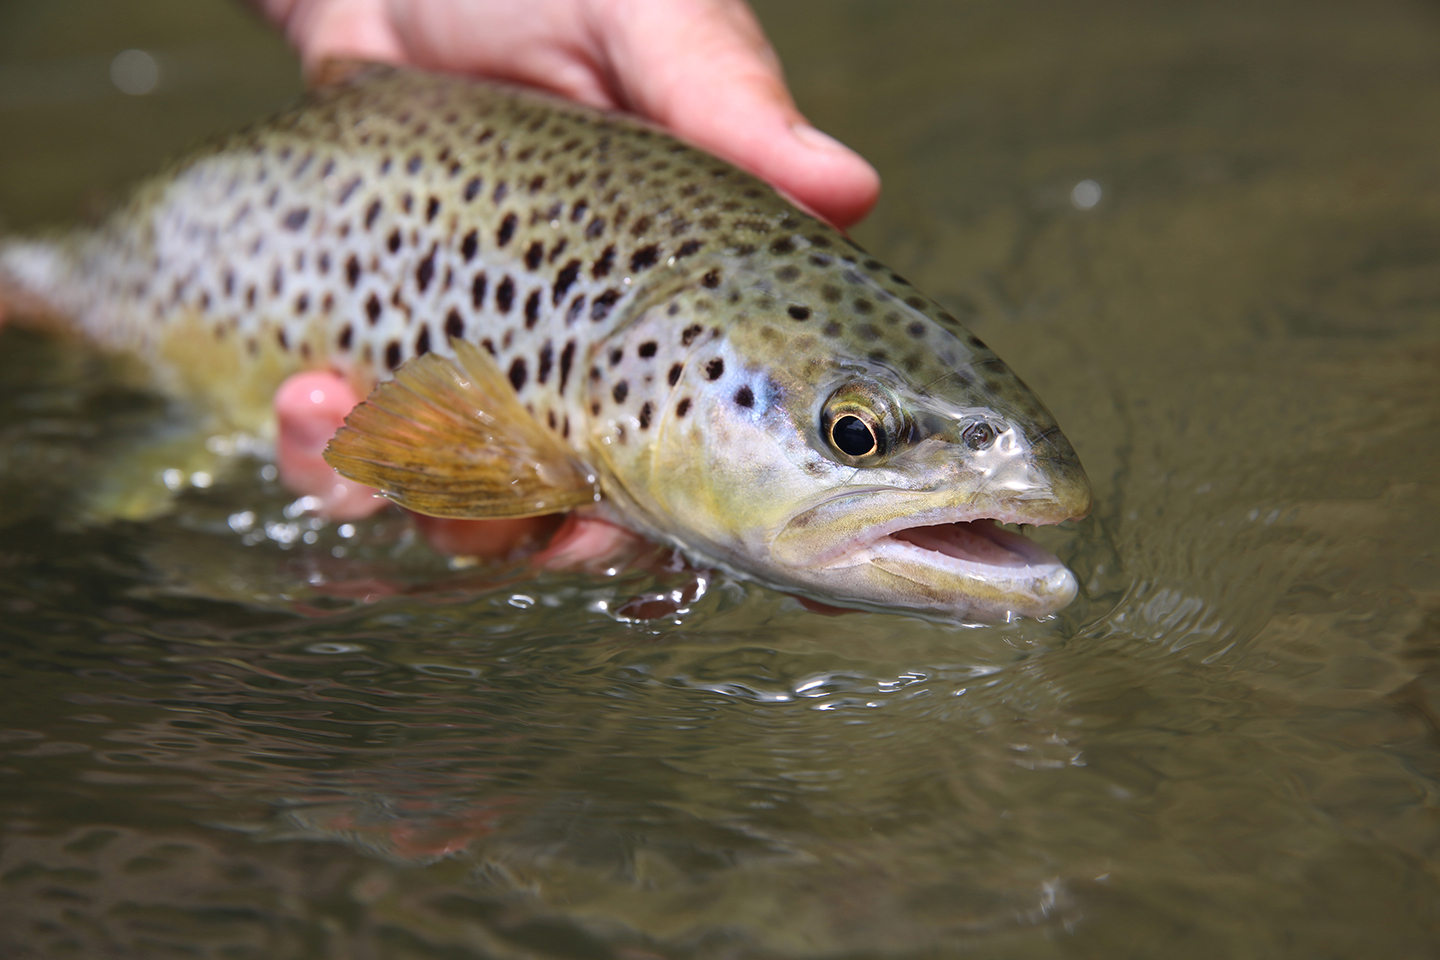 A Brown Trout about to be released into the water